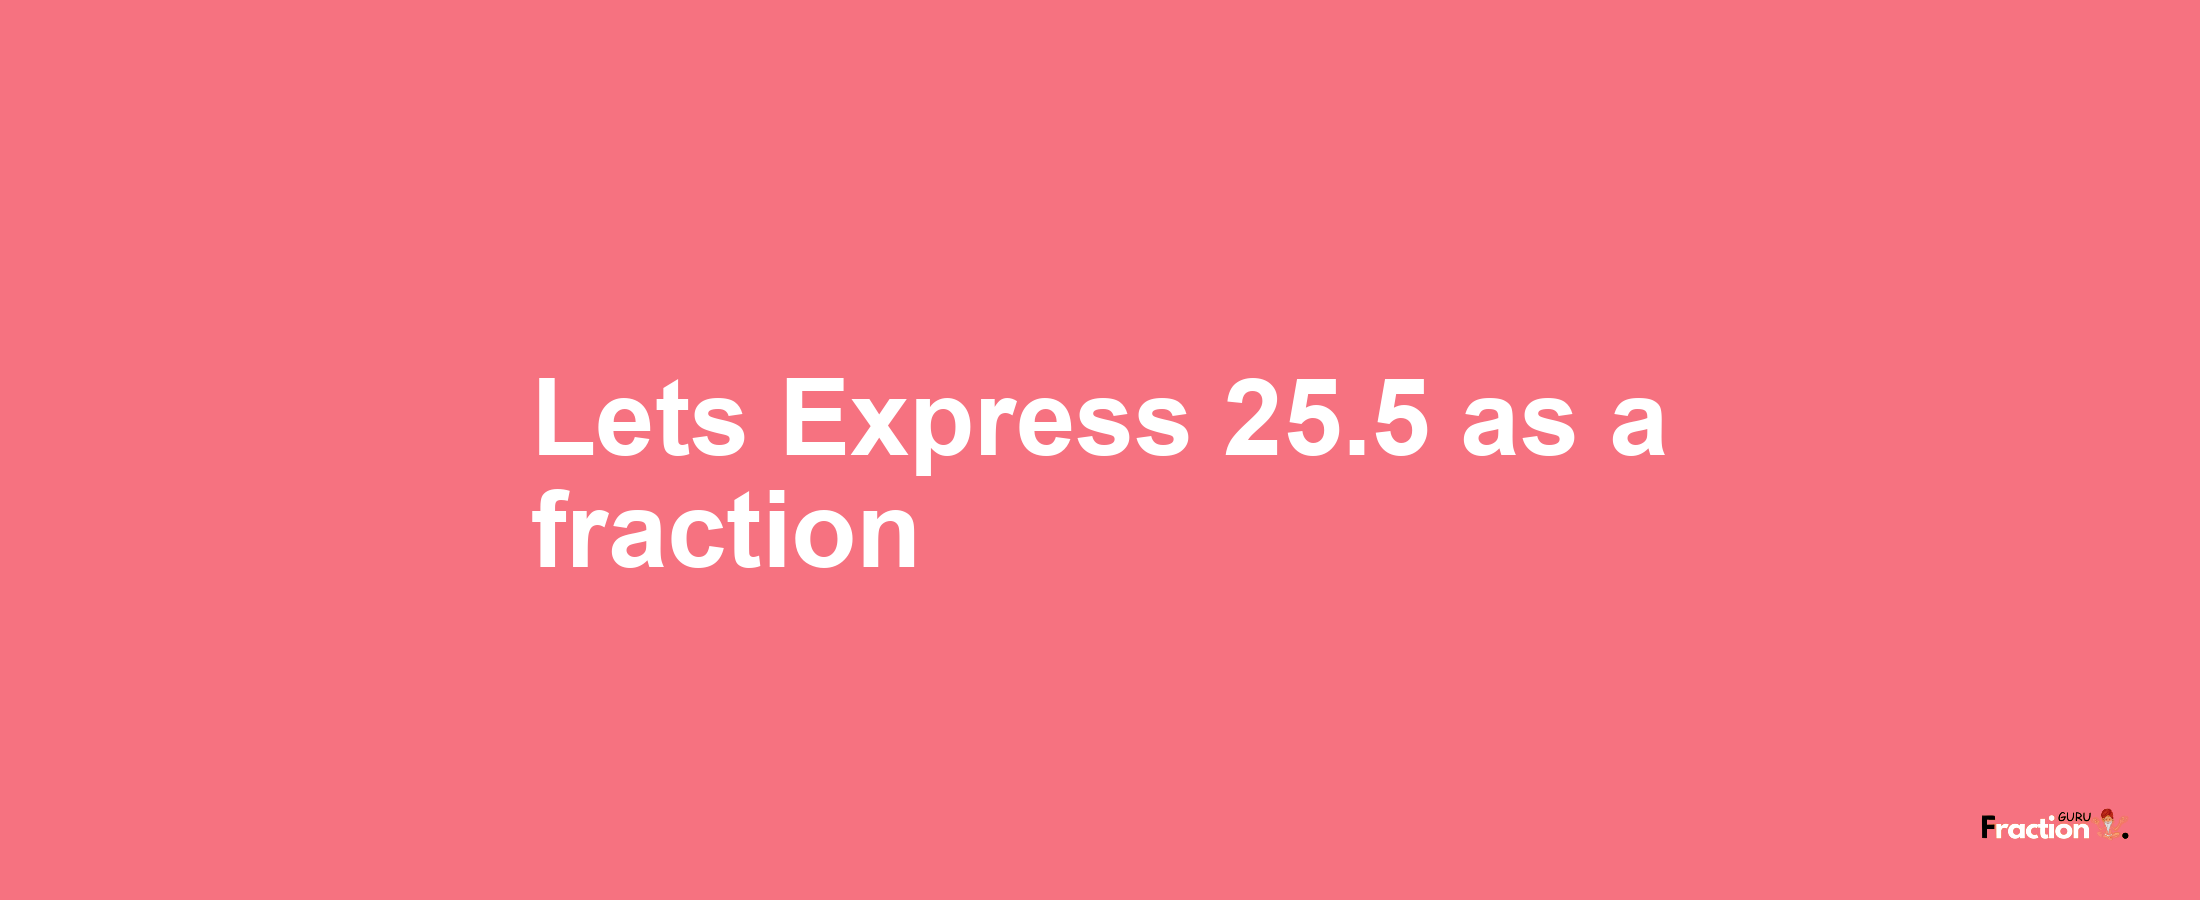 Lets Express 25.5 as afraction